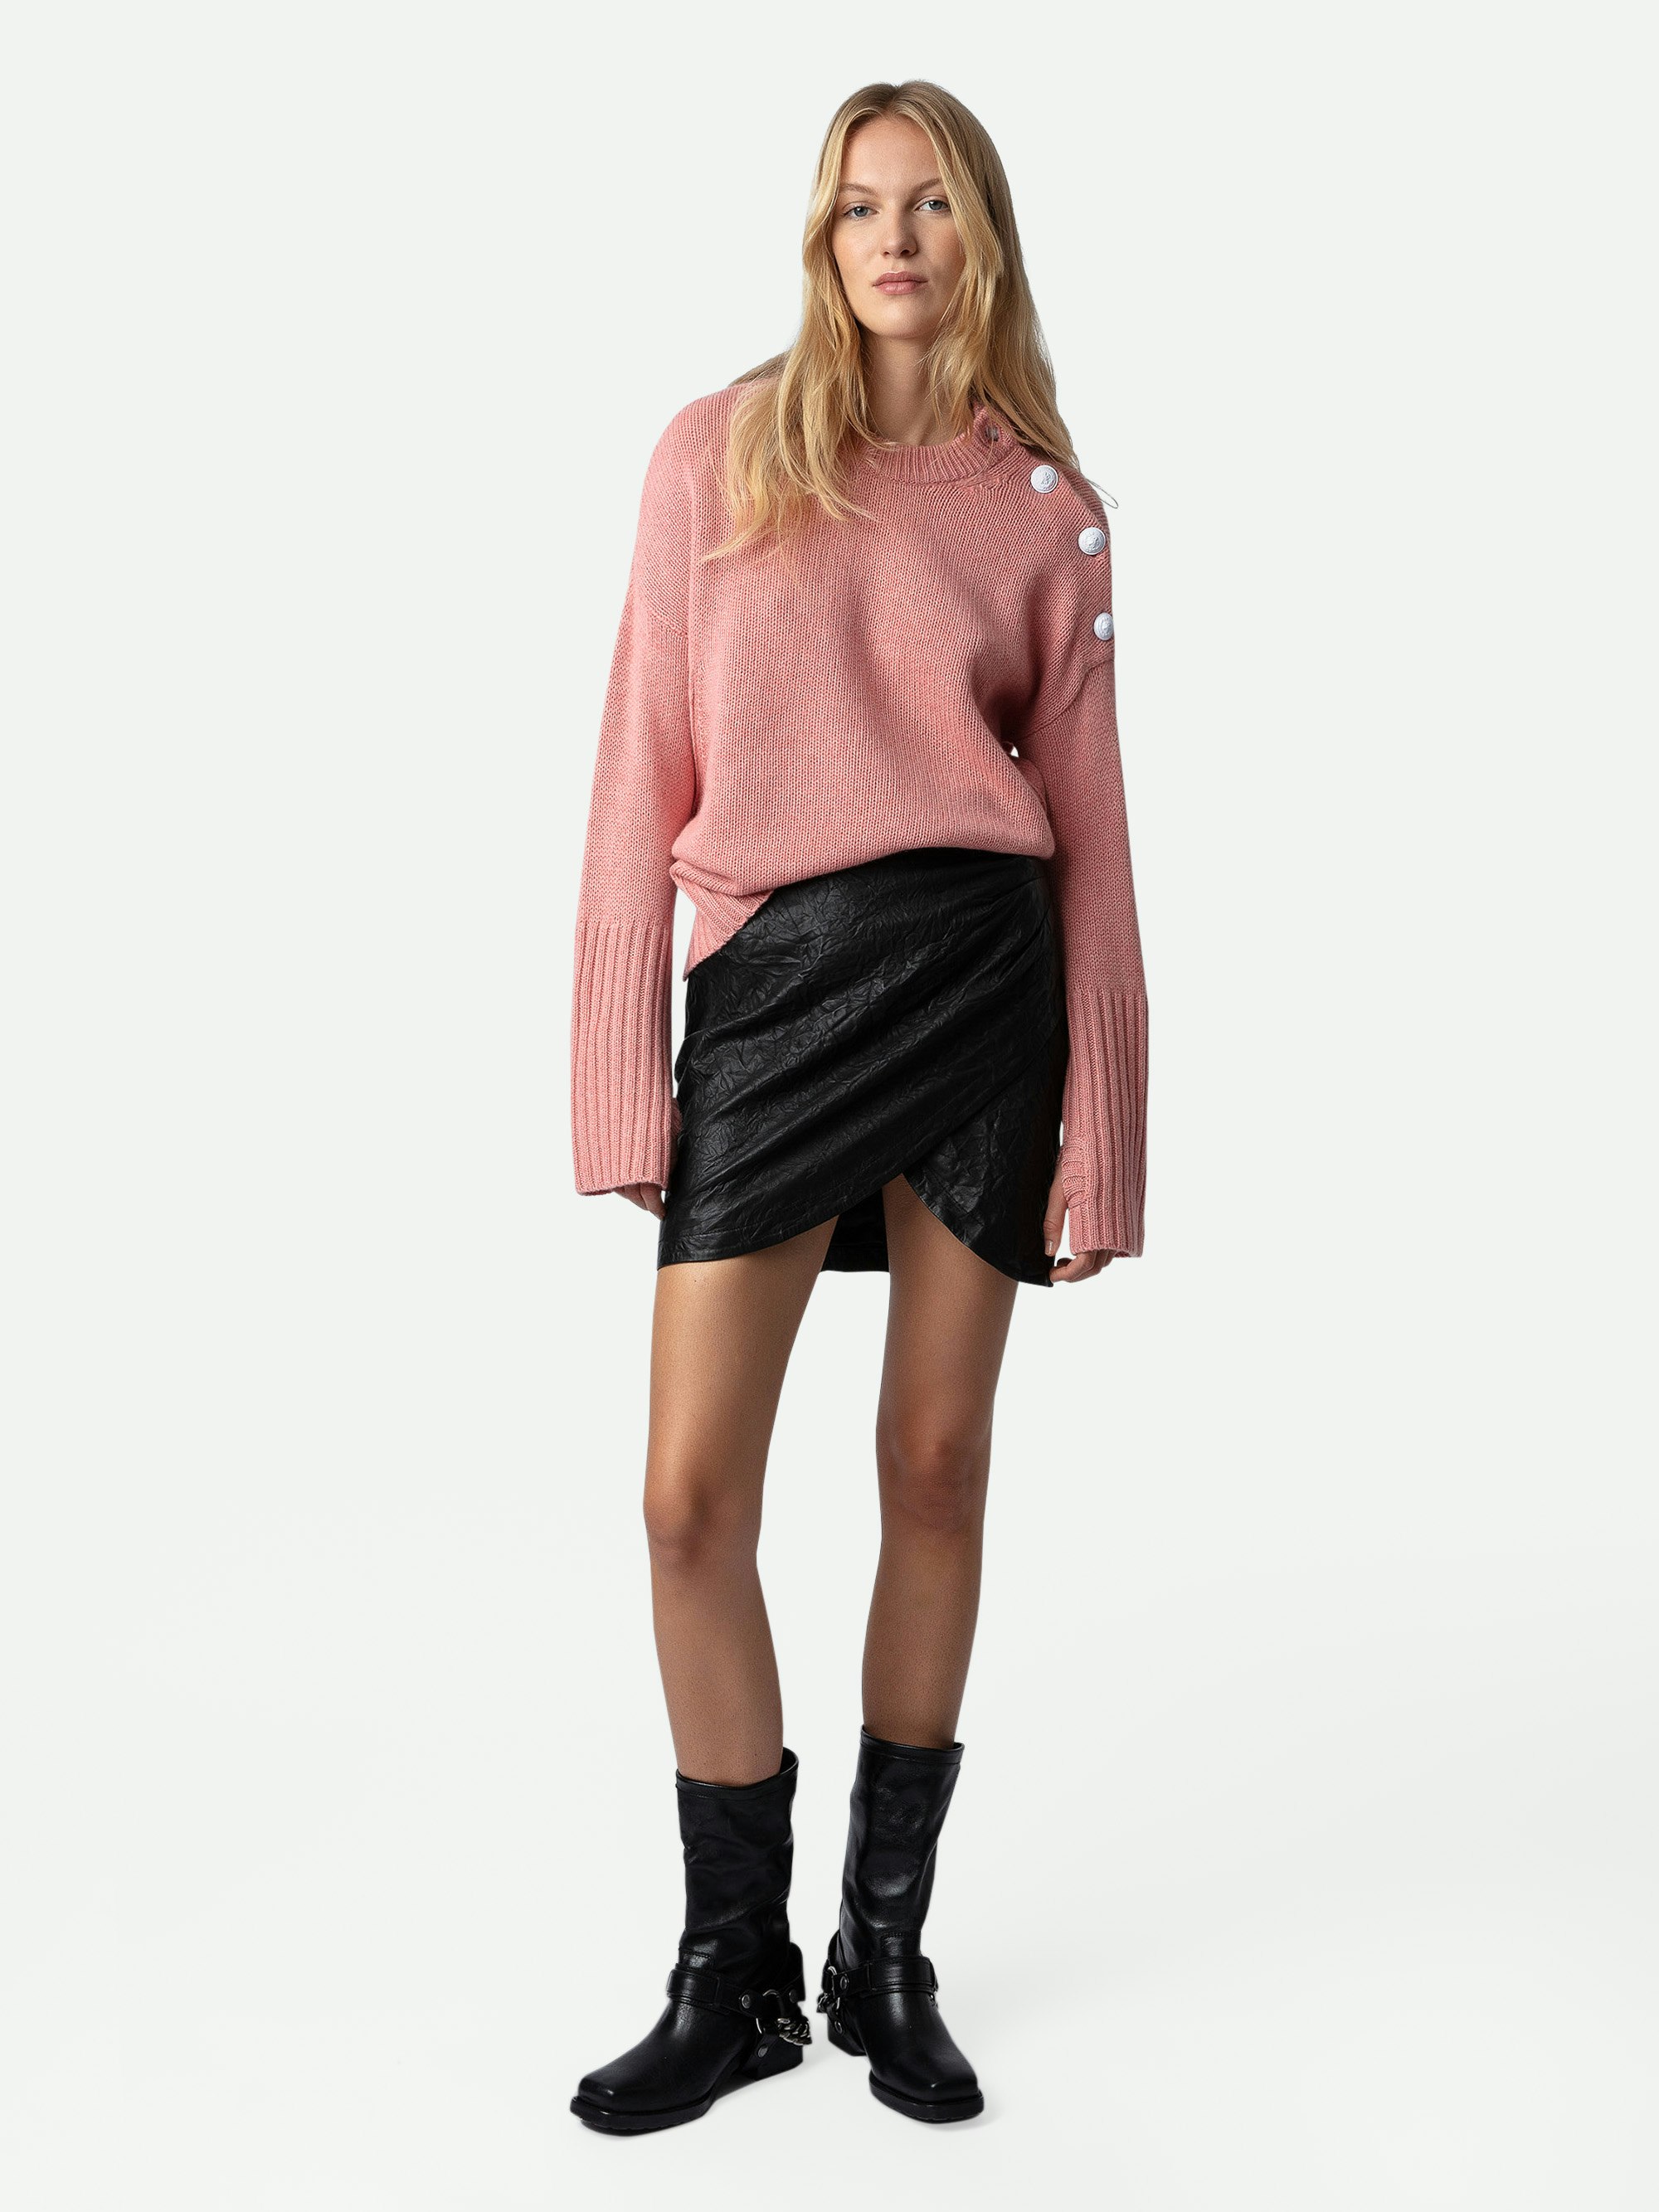 Malta Jumper 100% Cashmere - Pink 100% cashmere round-neck jumper with long sleeves and buttons on the shoulder.